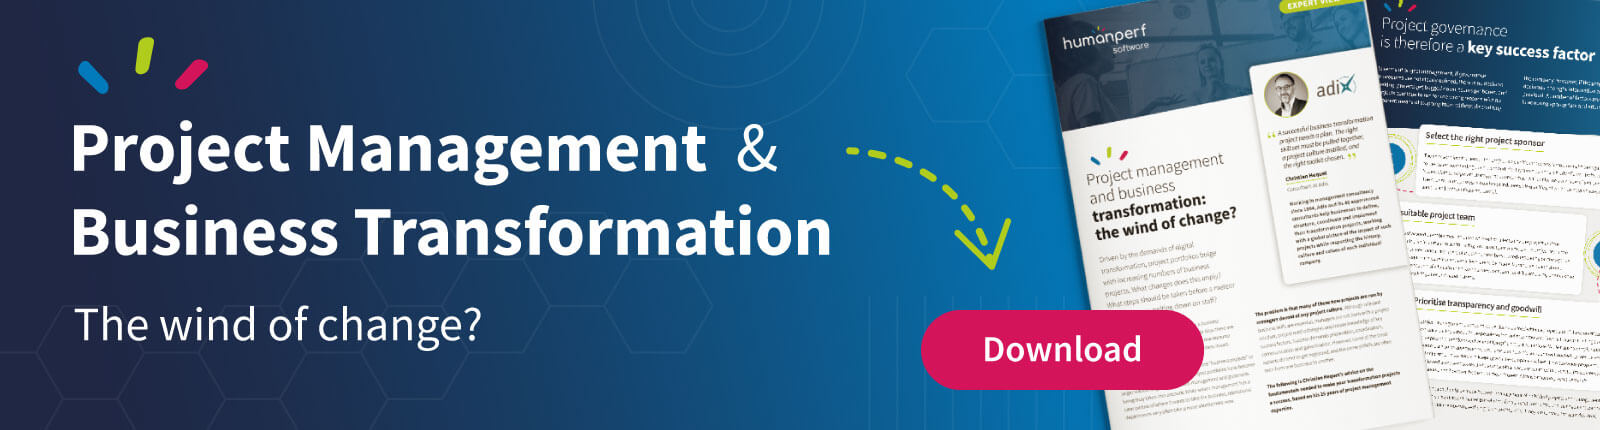 Download our expert view to make your transformation projects a success